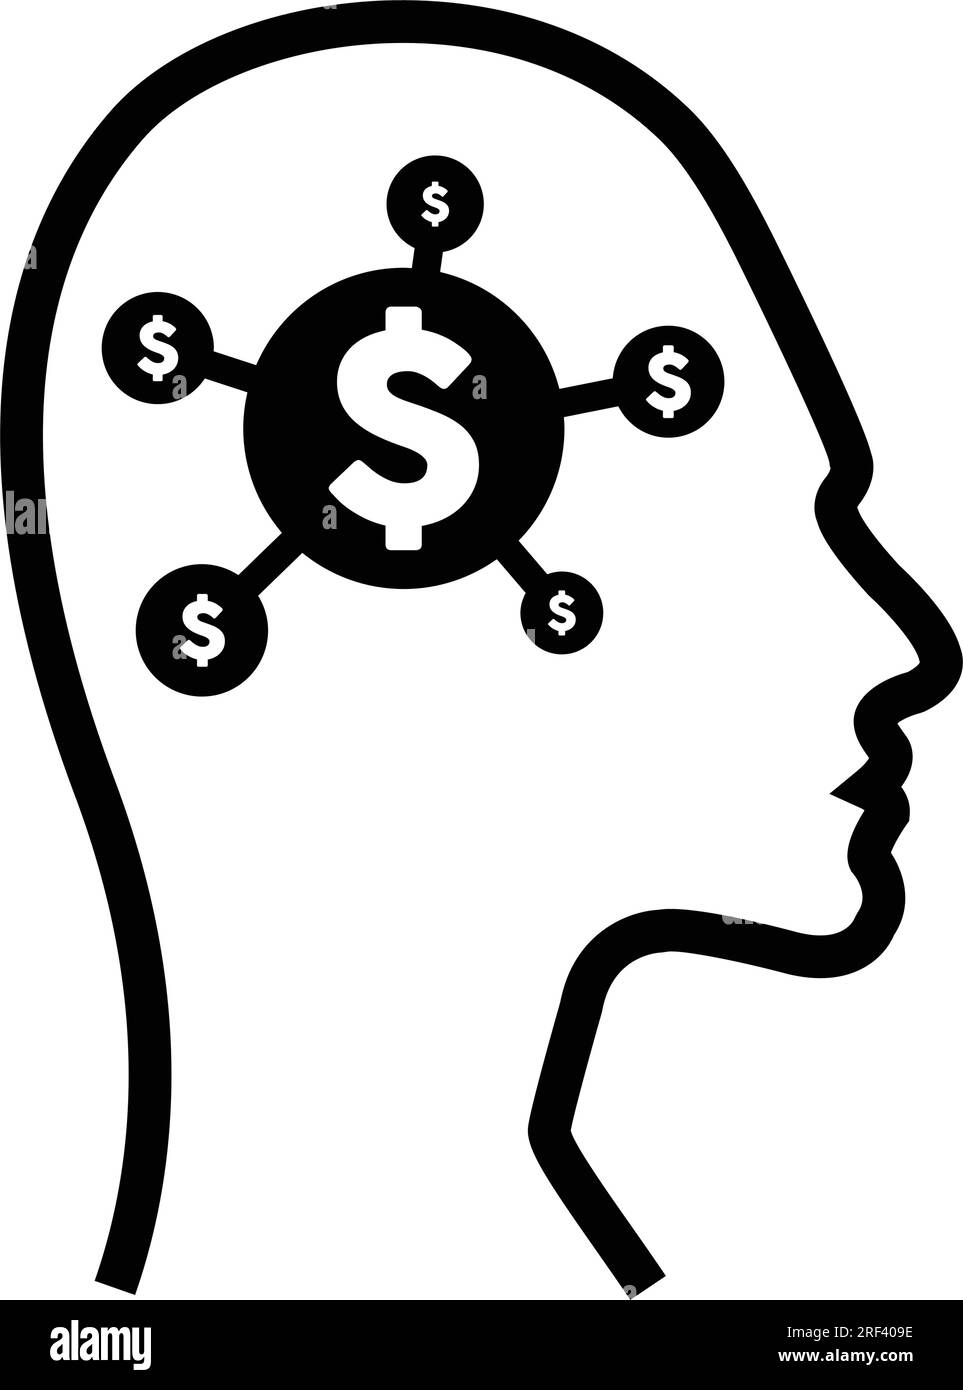 Dollar sign icon on futuristic human profile with a brain chip implant for Artificial Intelligence money and finance mind illustration in glyphs. Stock Vector